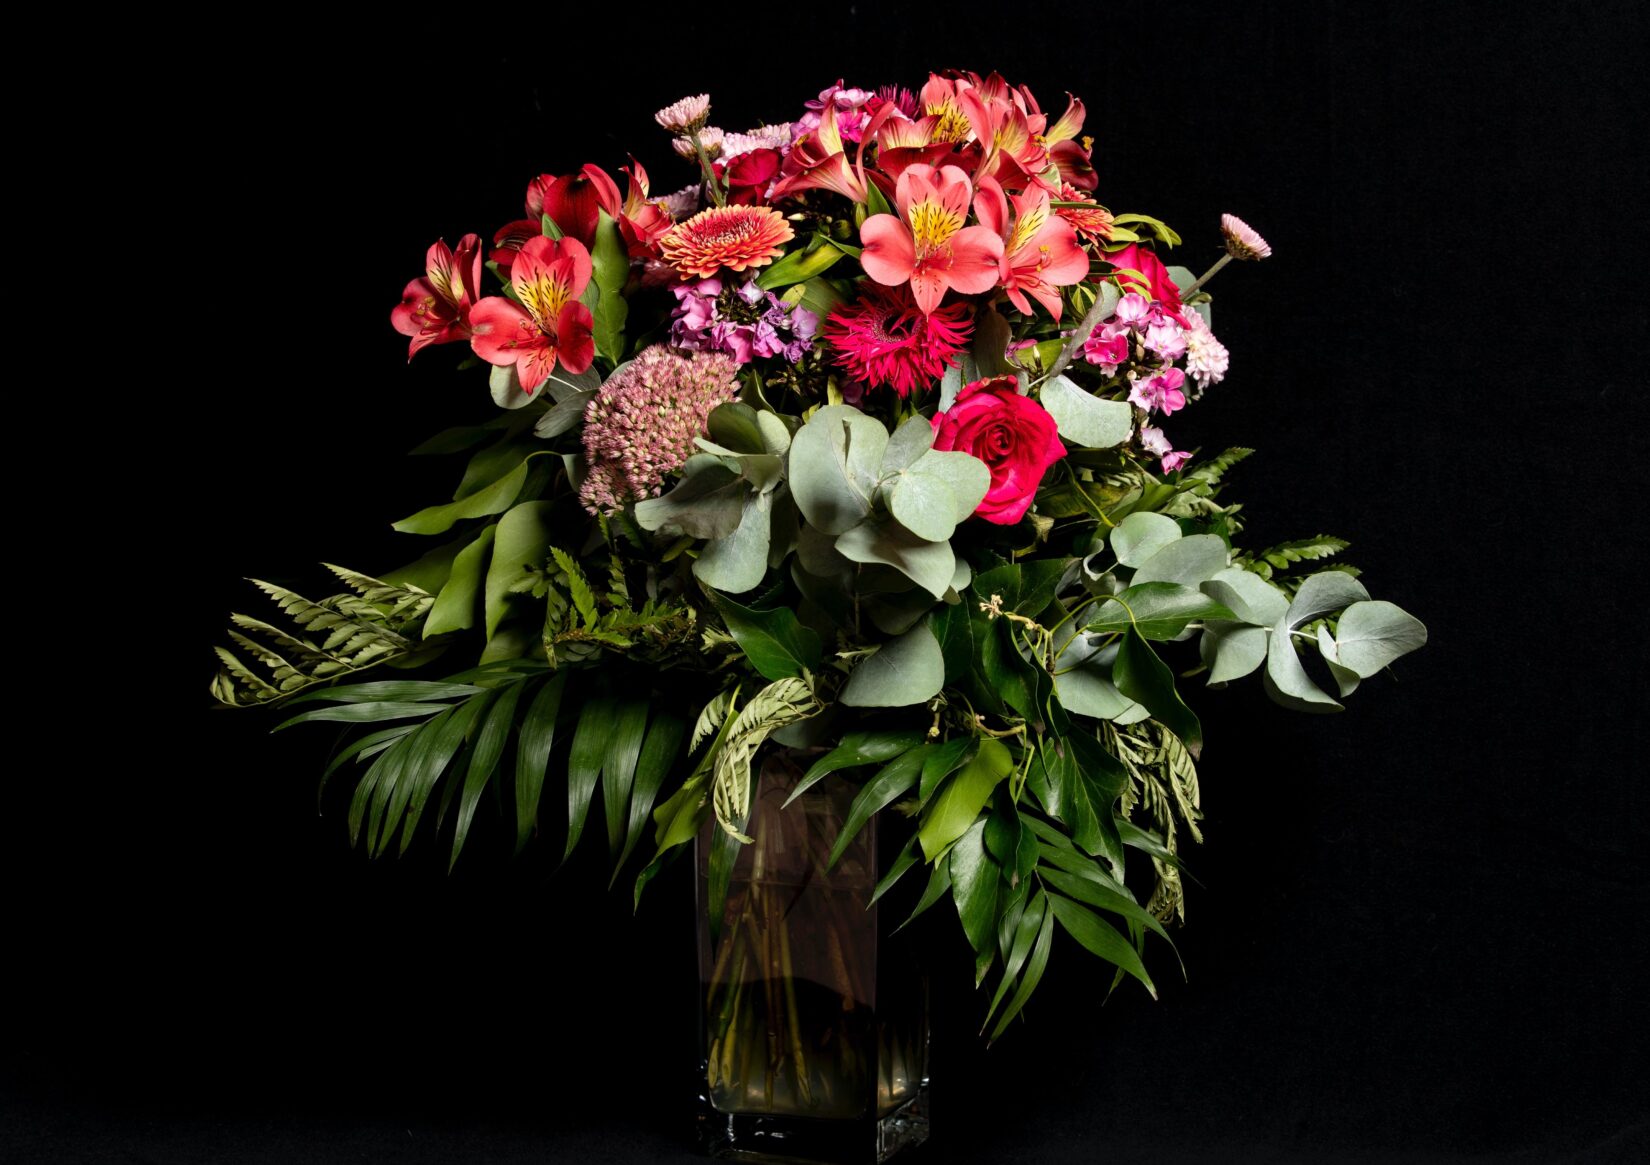 Floral arrangement with eucalyptus and other greenery